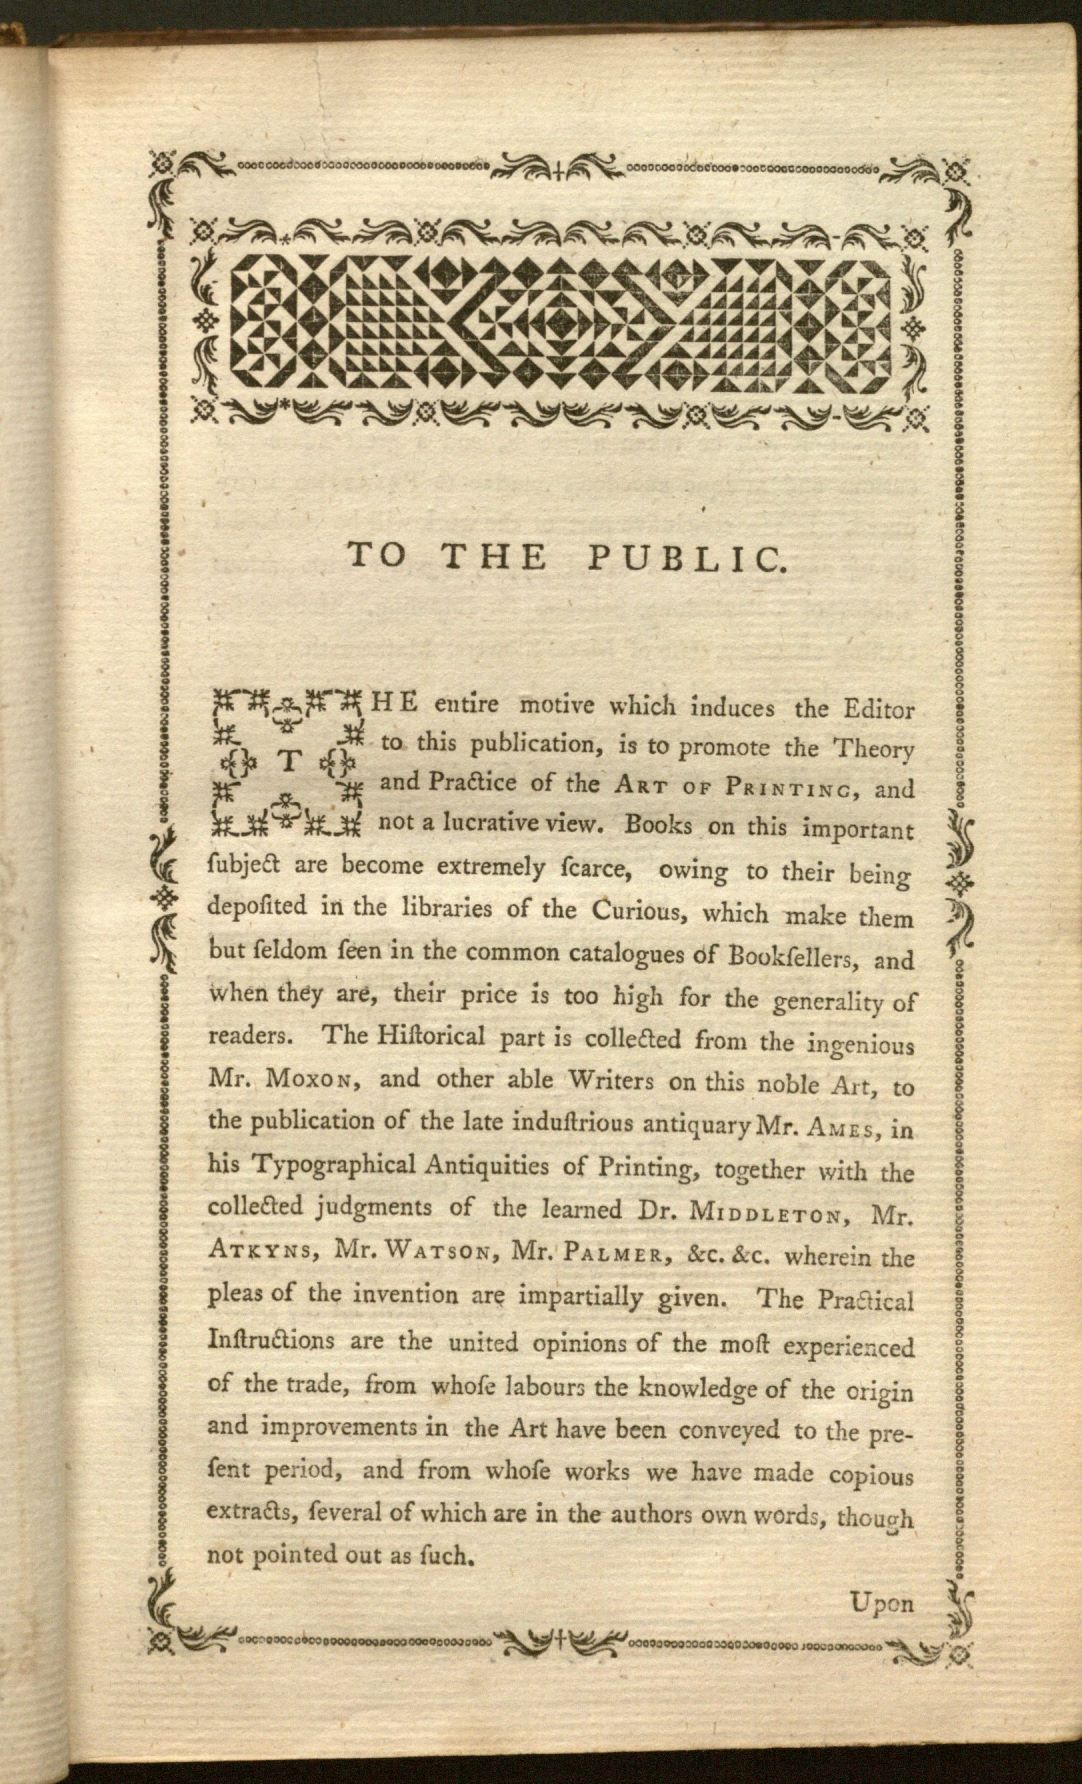 To the public from Luckcombe's History and Art of Printing (1771)